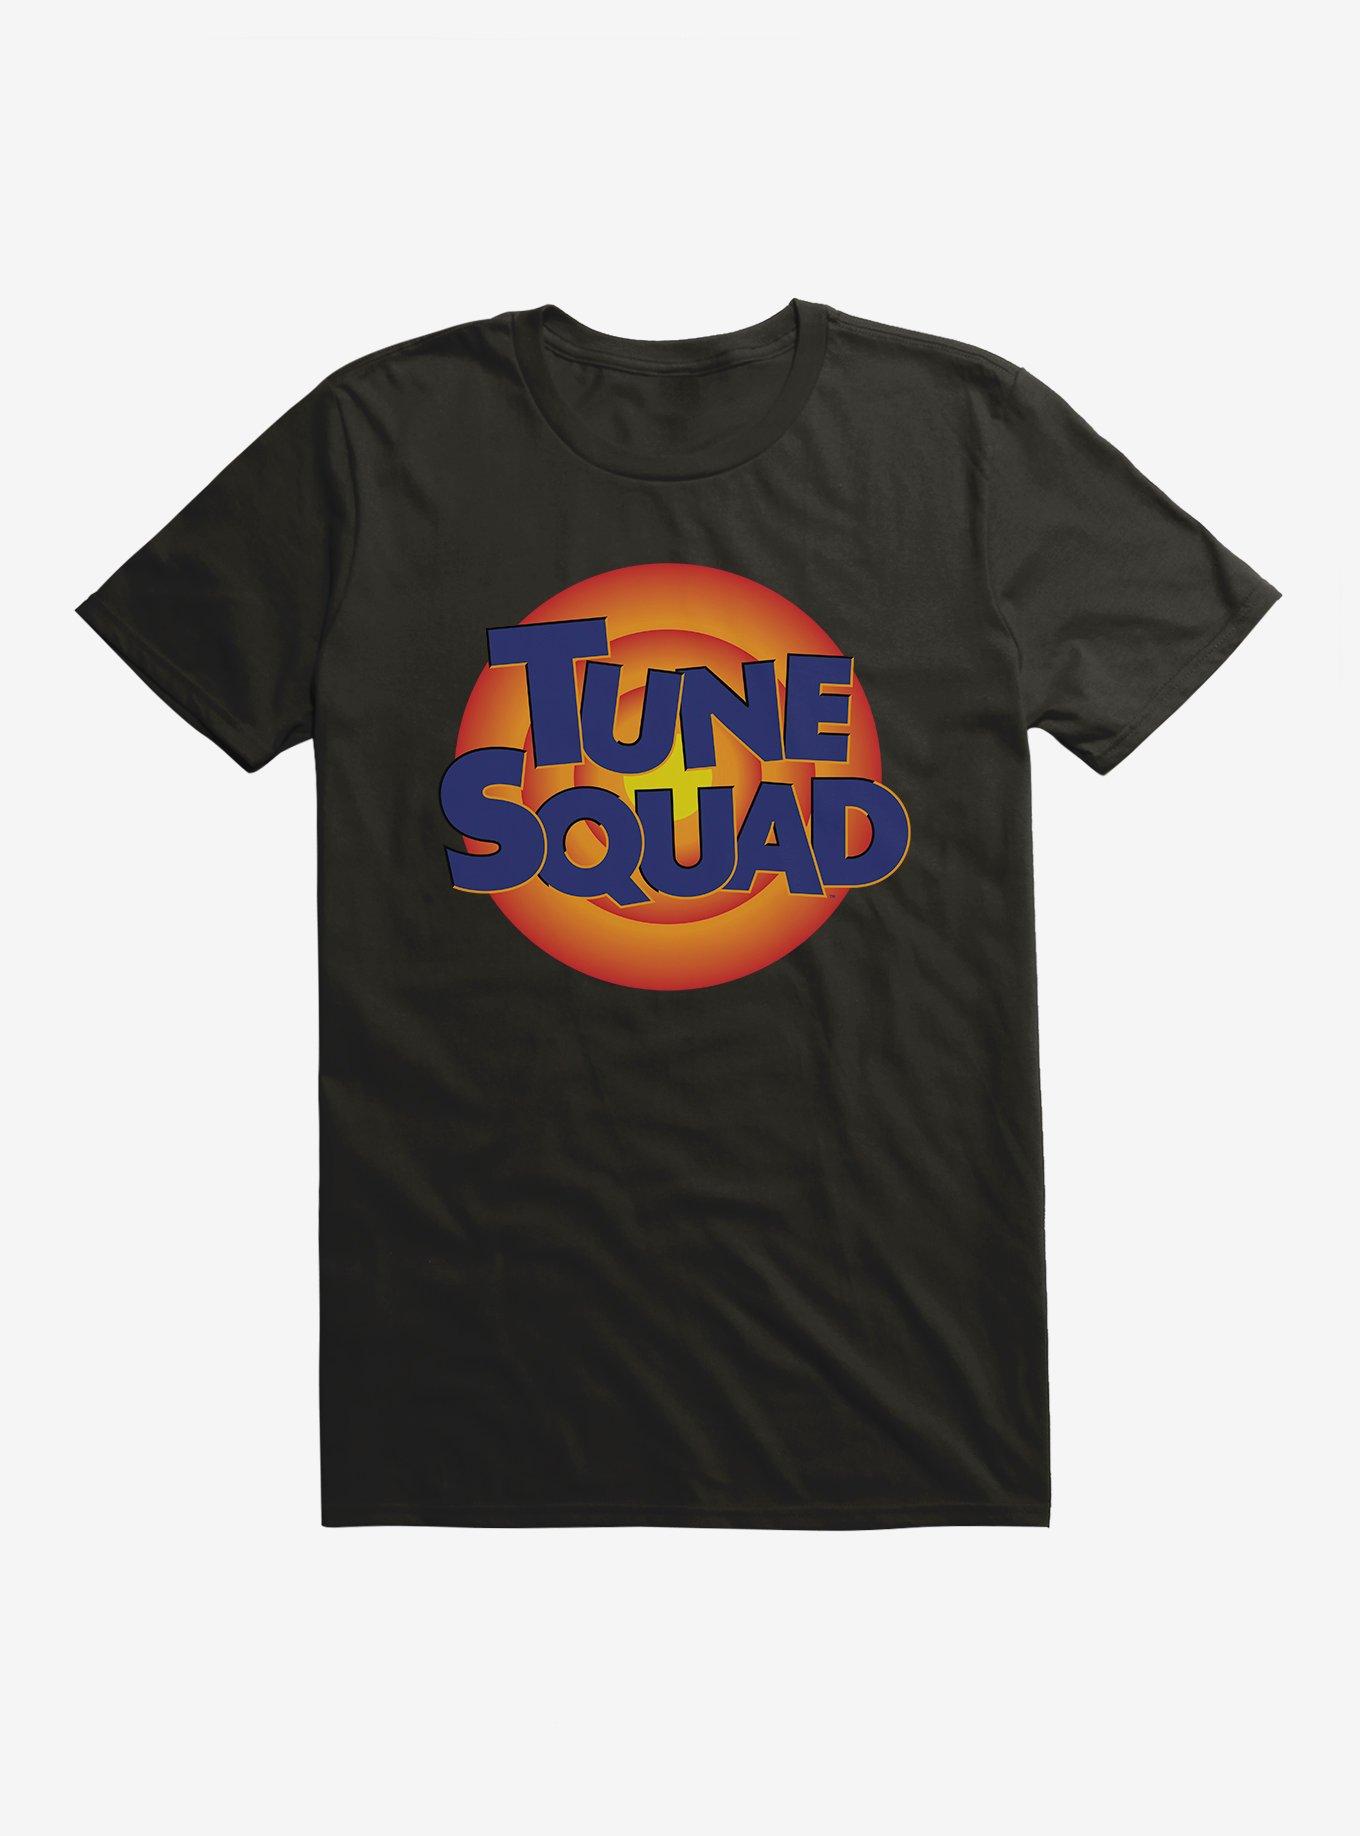 Space Jam: A New Legacy Tune Squad Logo T-Shirt